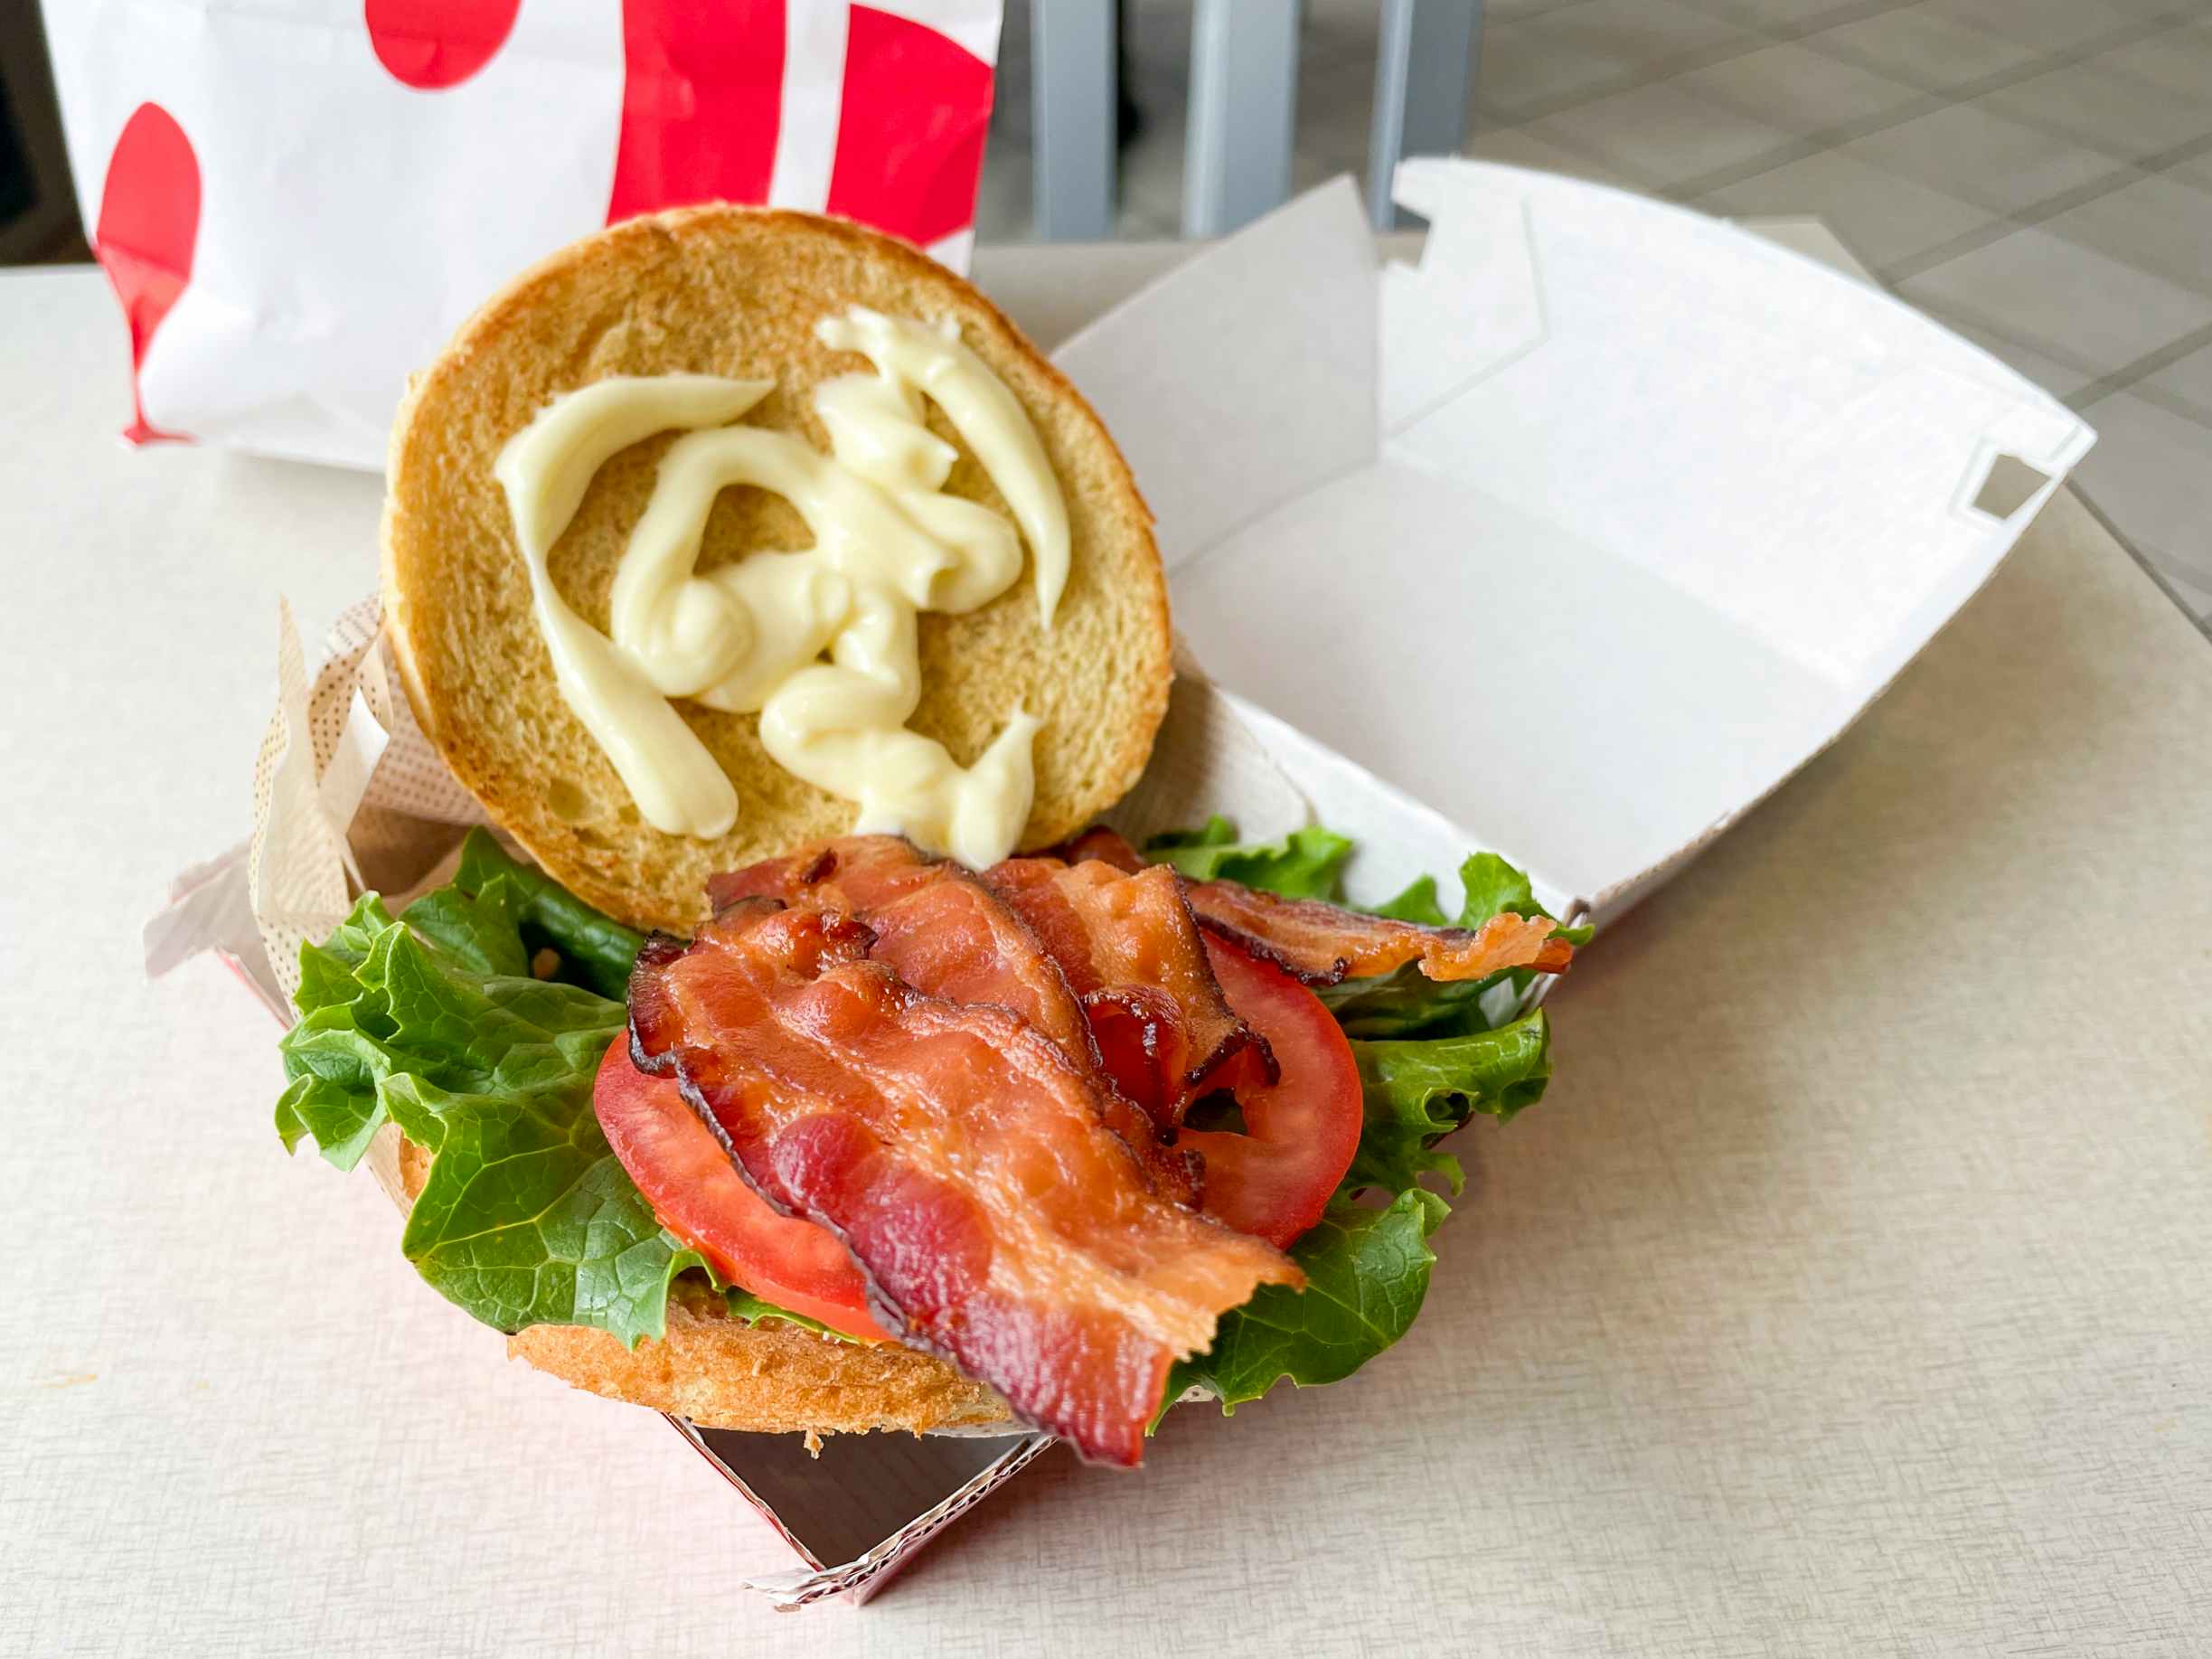 A bacon lettuce tomato sandwich open in a cardboard takeout box from chick-fil-a